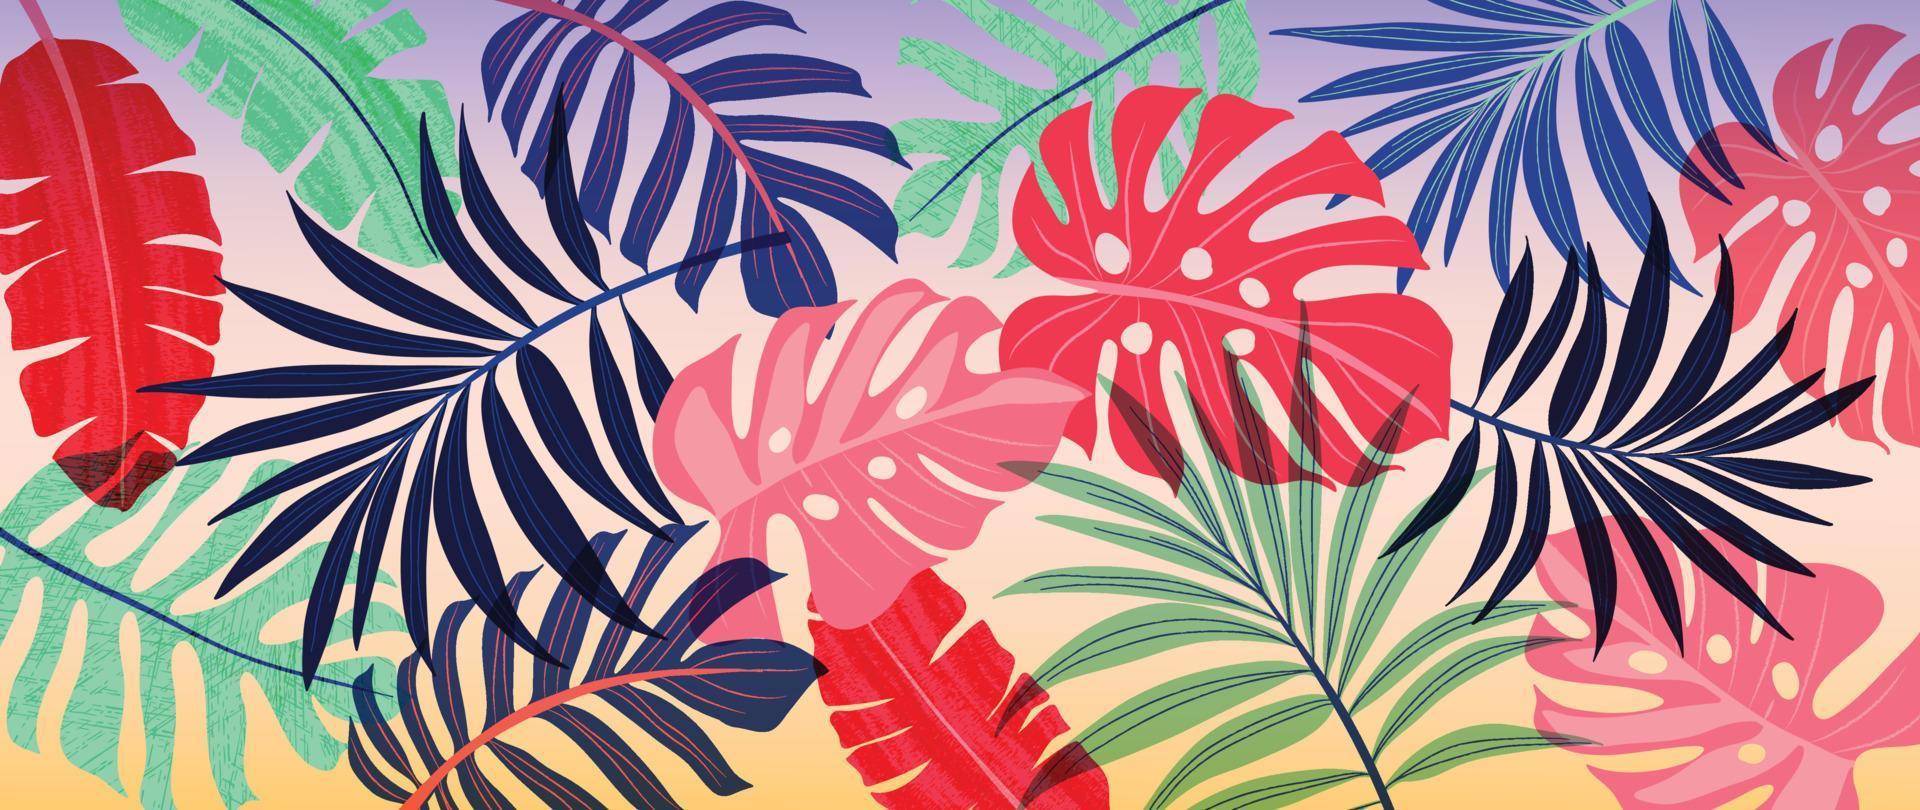 Colorful tropical background vector illustration. Jungle plants, monstera palm leaves, exotic spring summer style grunge watercolor texture. Contemporary art design for home decoration, wallpaper.